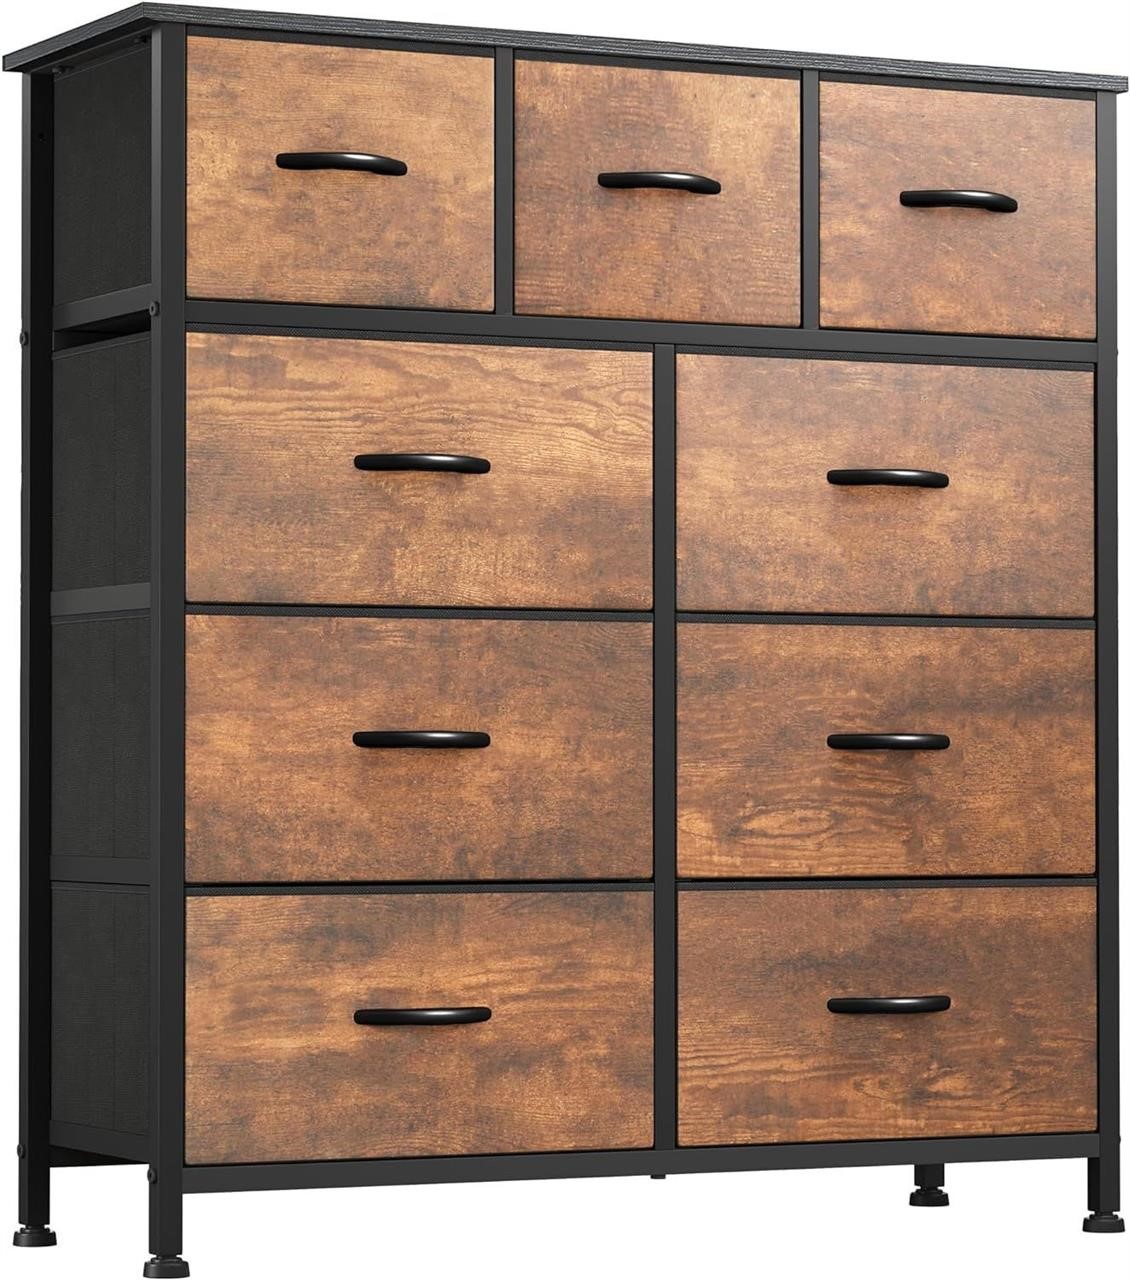 YITAHOME Dresser with 9 Drawers